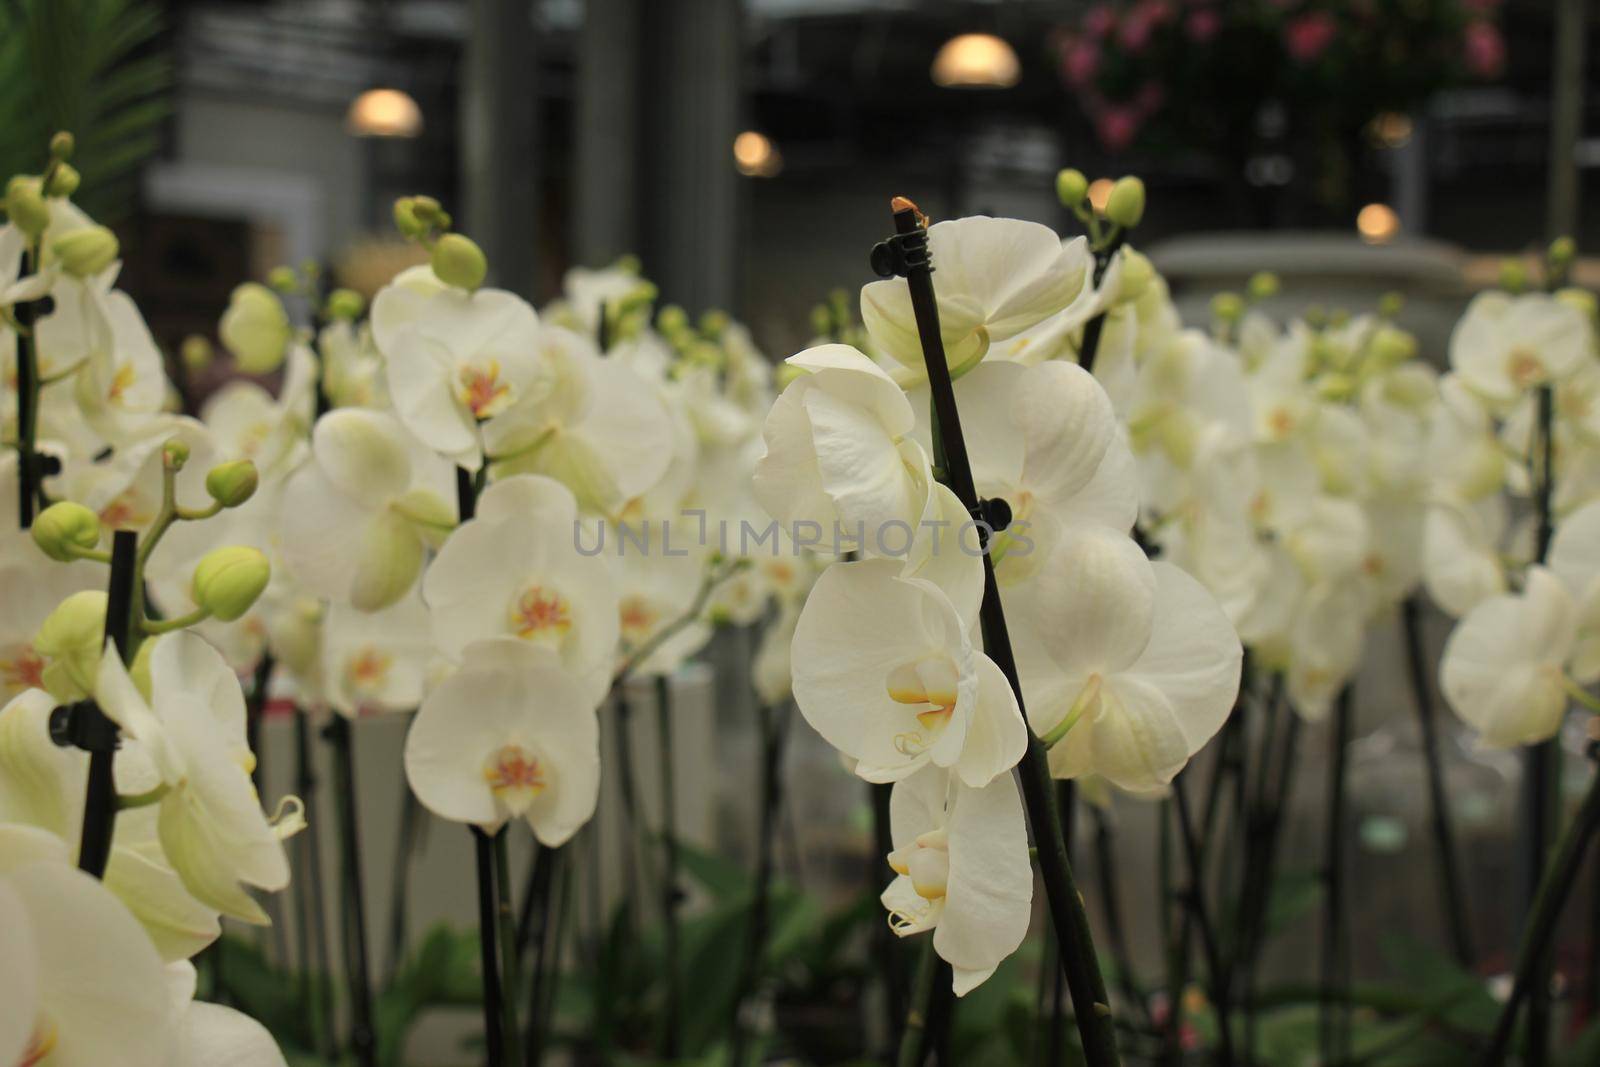 Phalaenopsis orchid, snow white with yellow heart